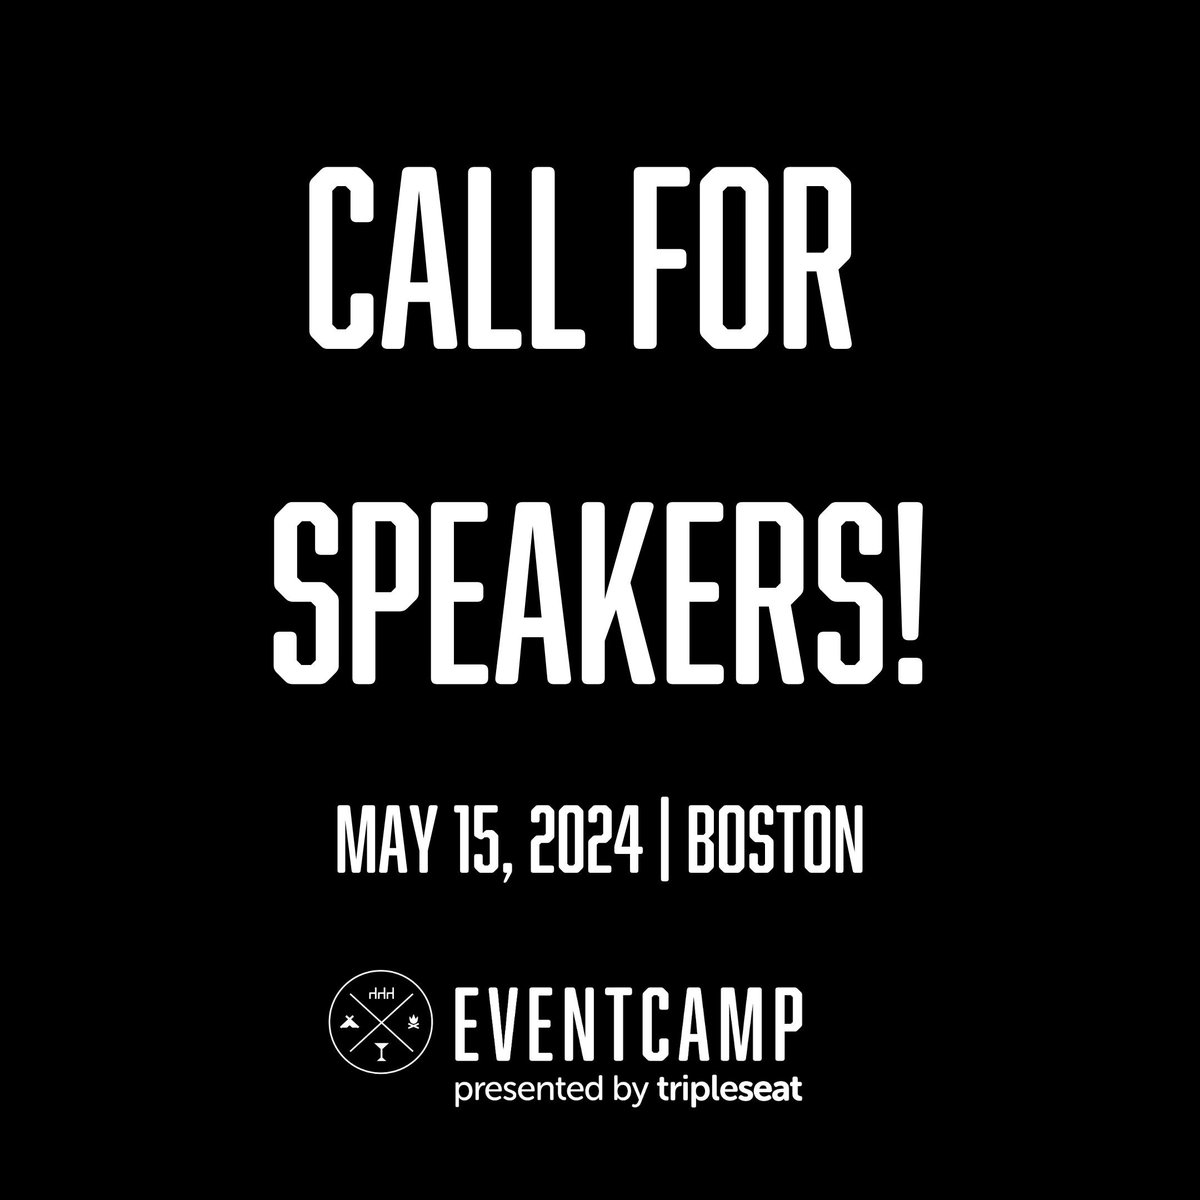 Interested in speaking at Tripleseat's EventCamp conference for hospitality sales and event managers on May 15, 2024 in Boston? Our call for speakers is open! Place your submission by November 17 at the link below. bit.ly/4078TLO